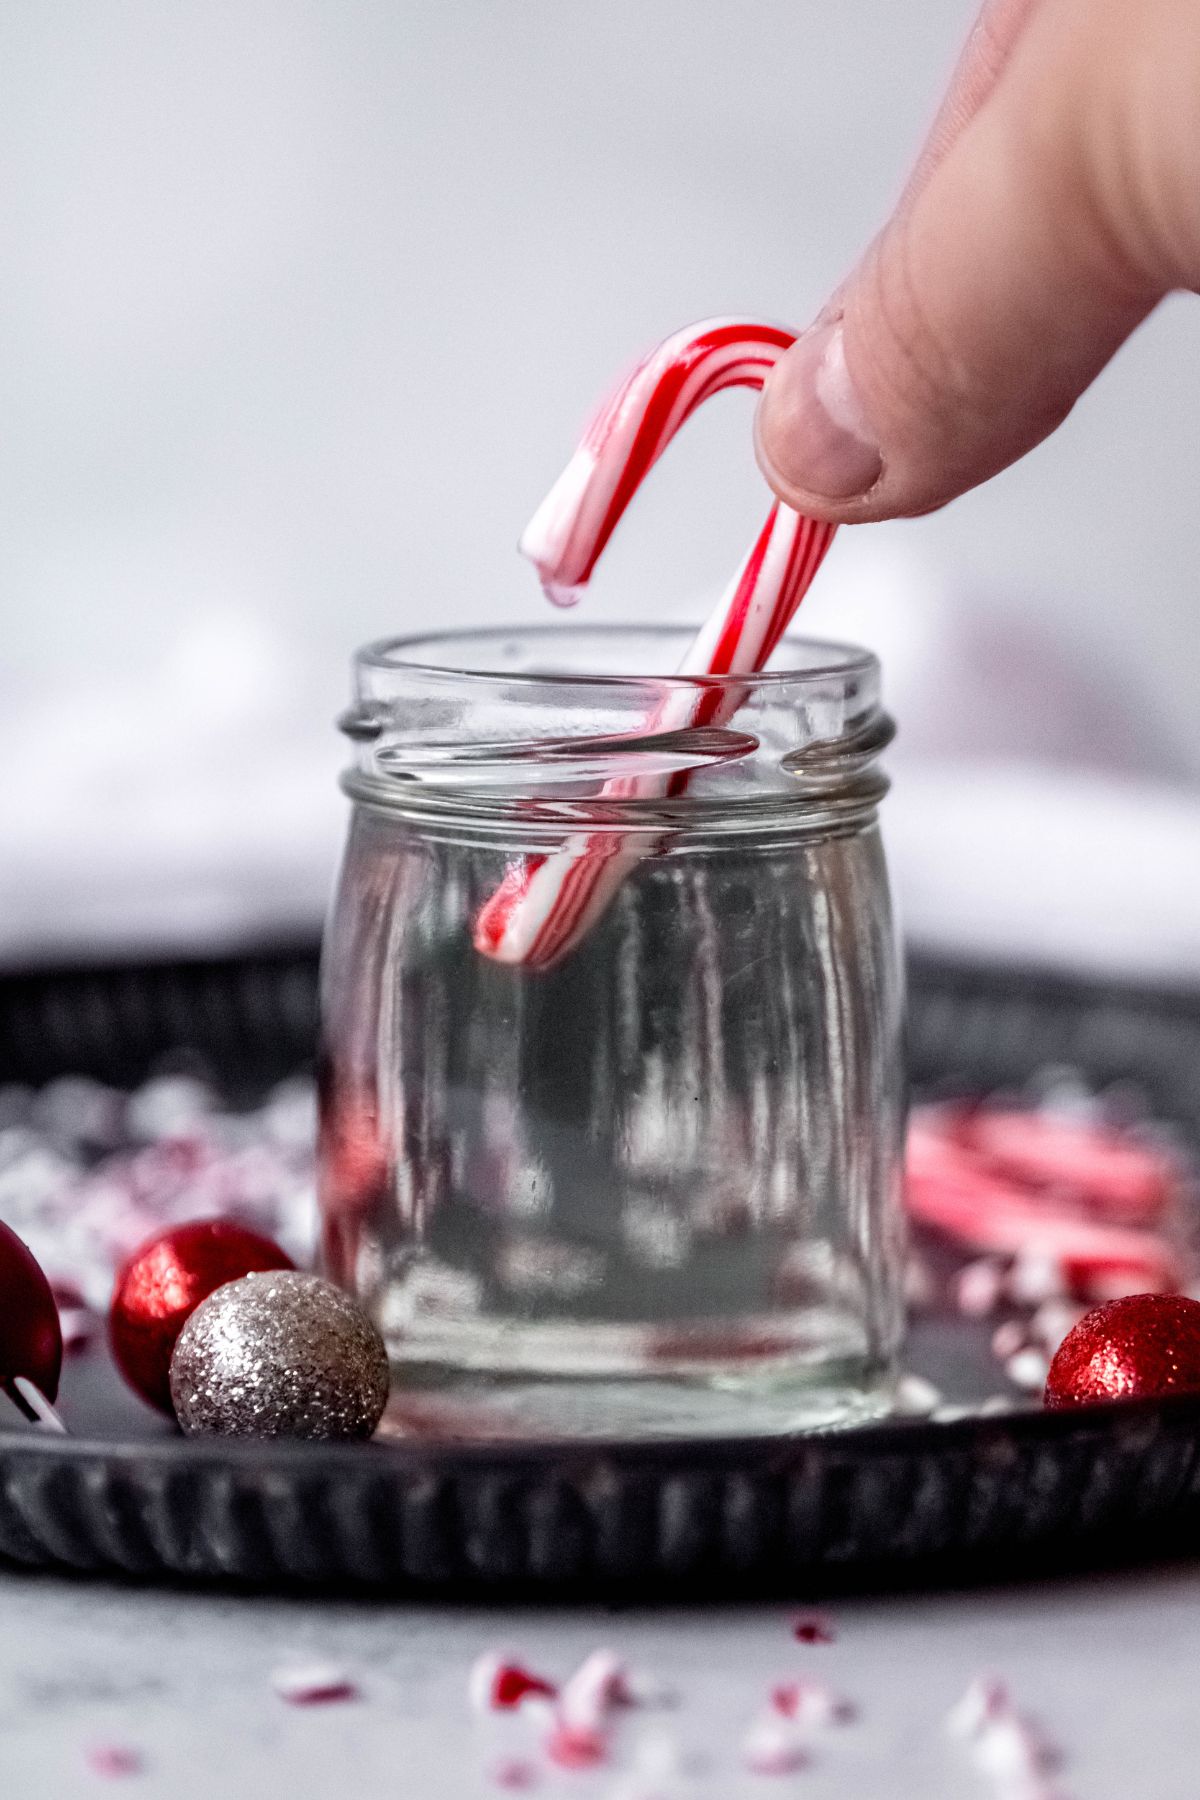 hand dipping a candy cane into the peppermint syrup.